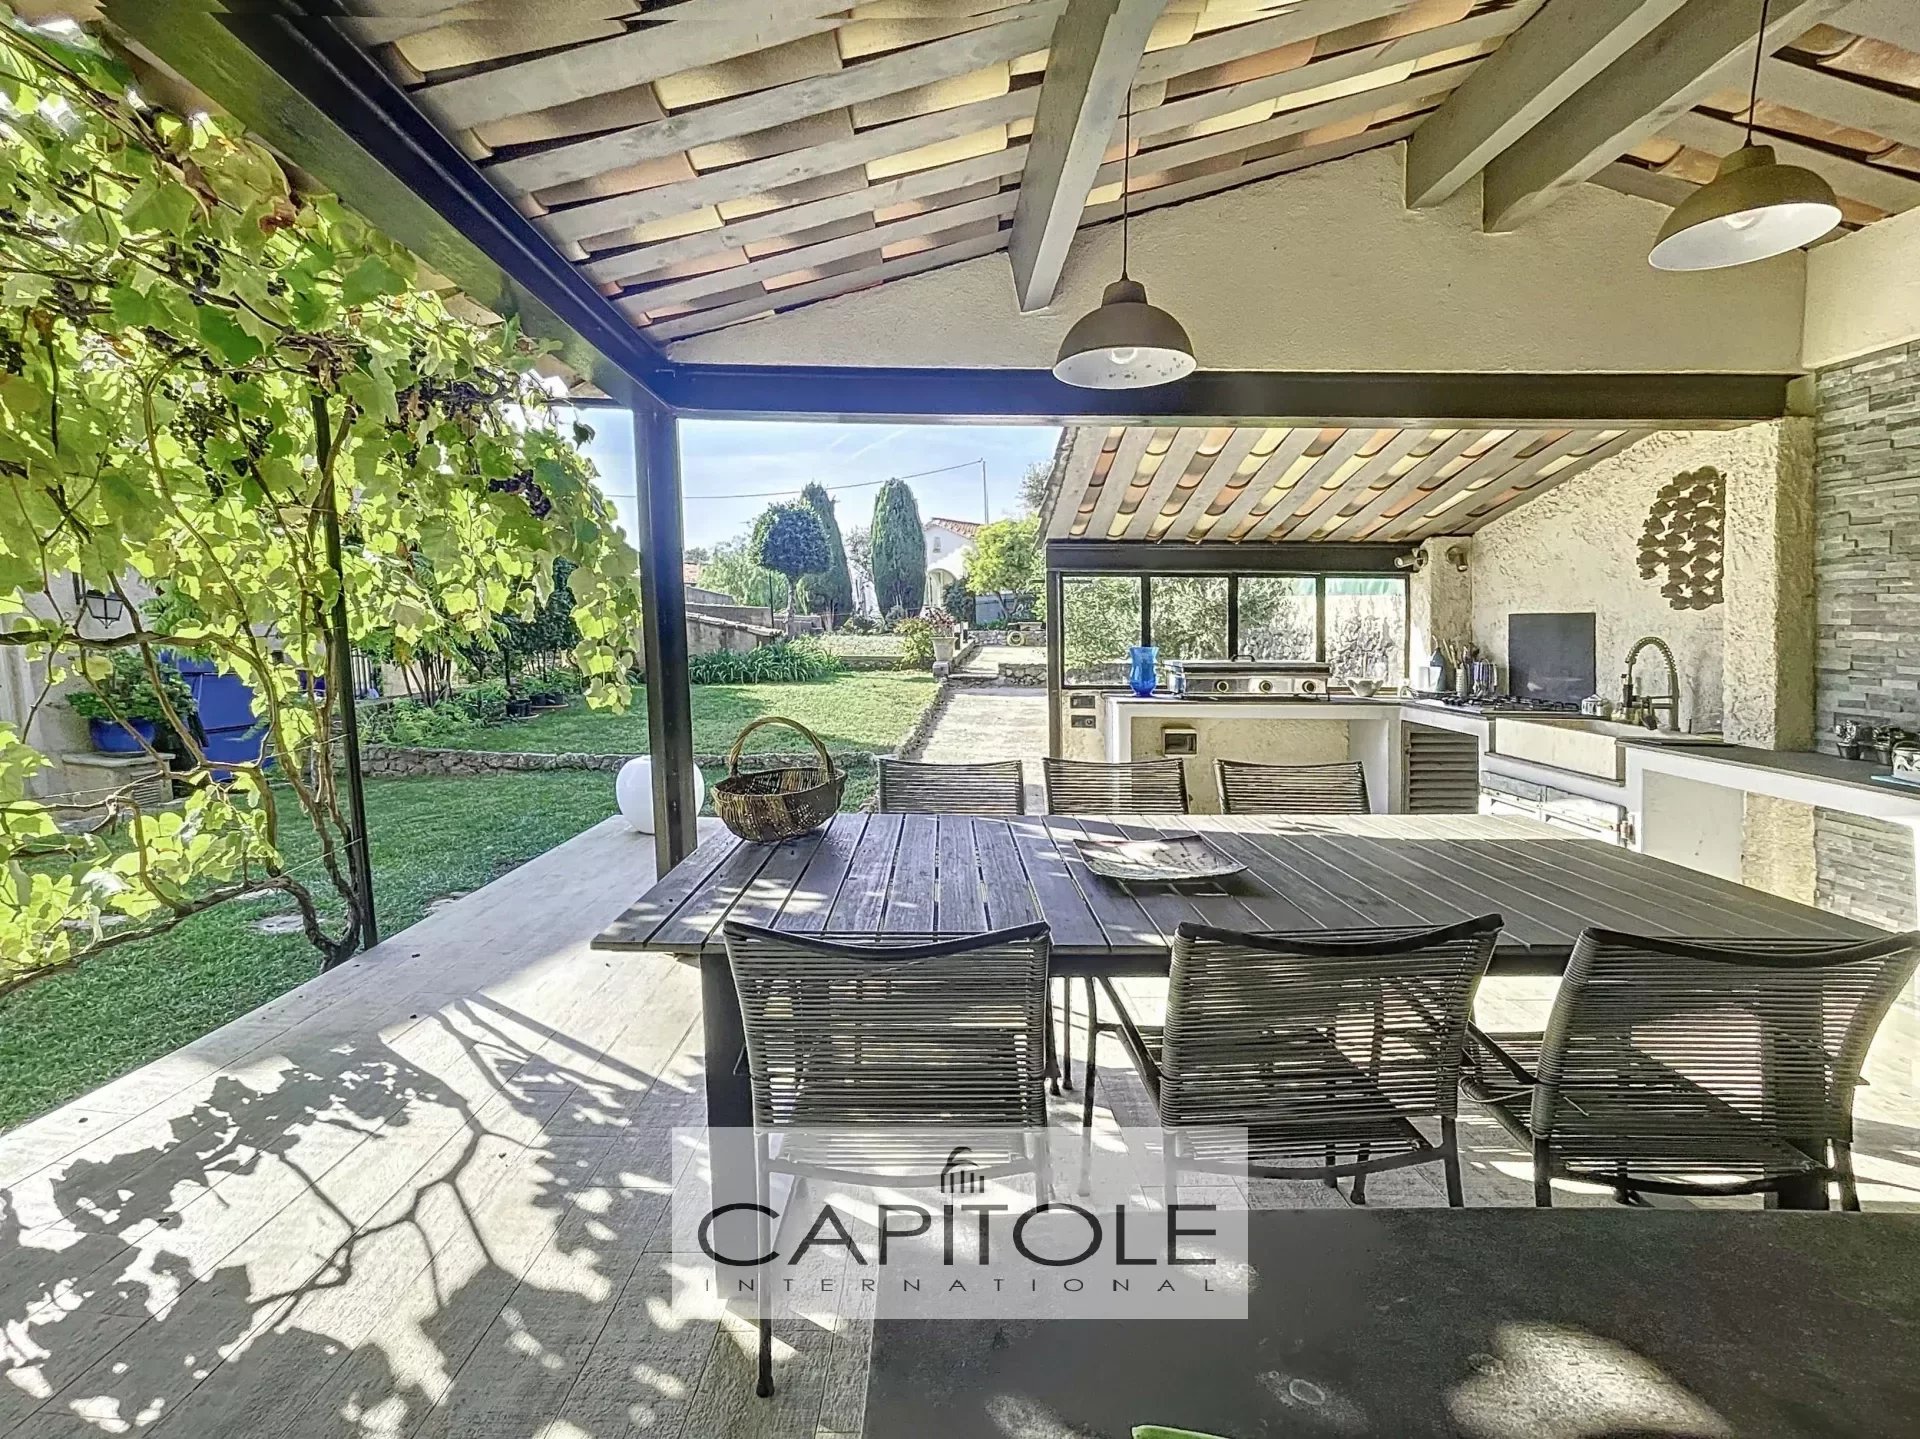 ANTIBES Steps from the town center , elegant villa of 245 sqm, land of 1 360 sqm with pool